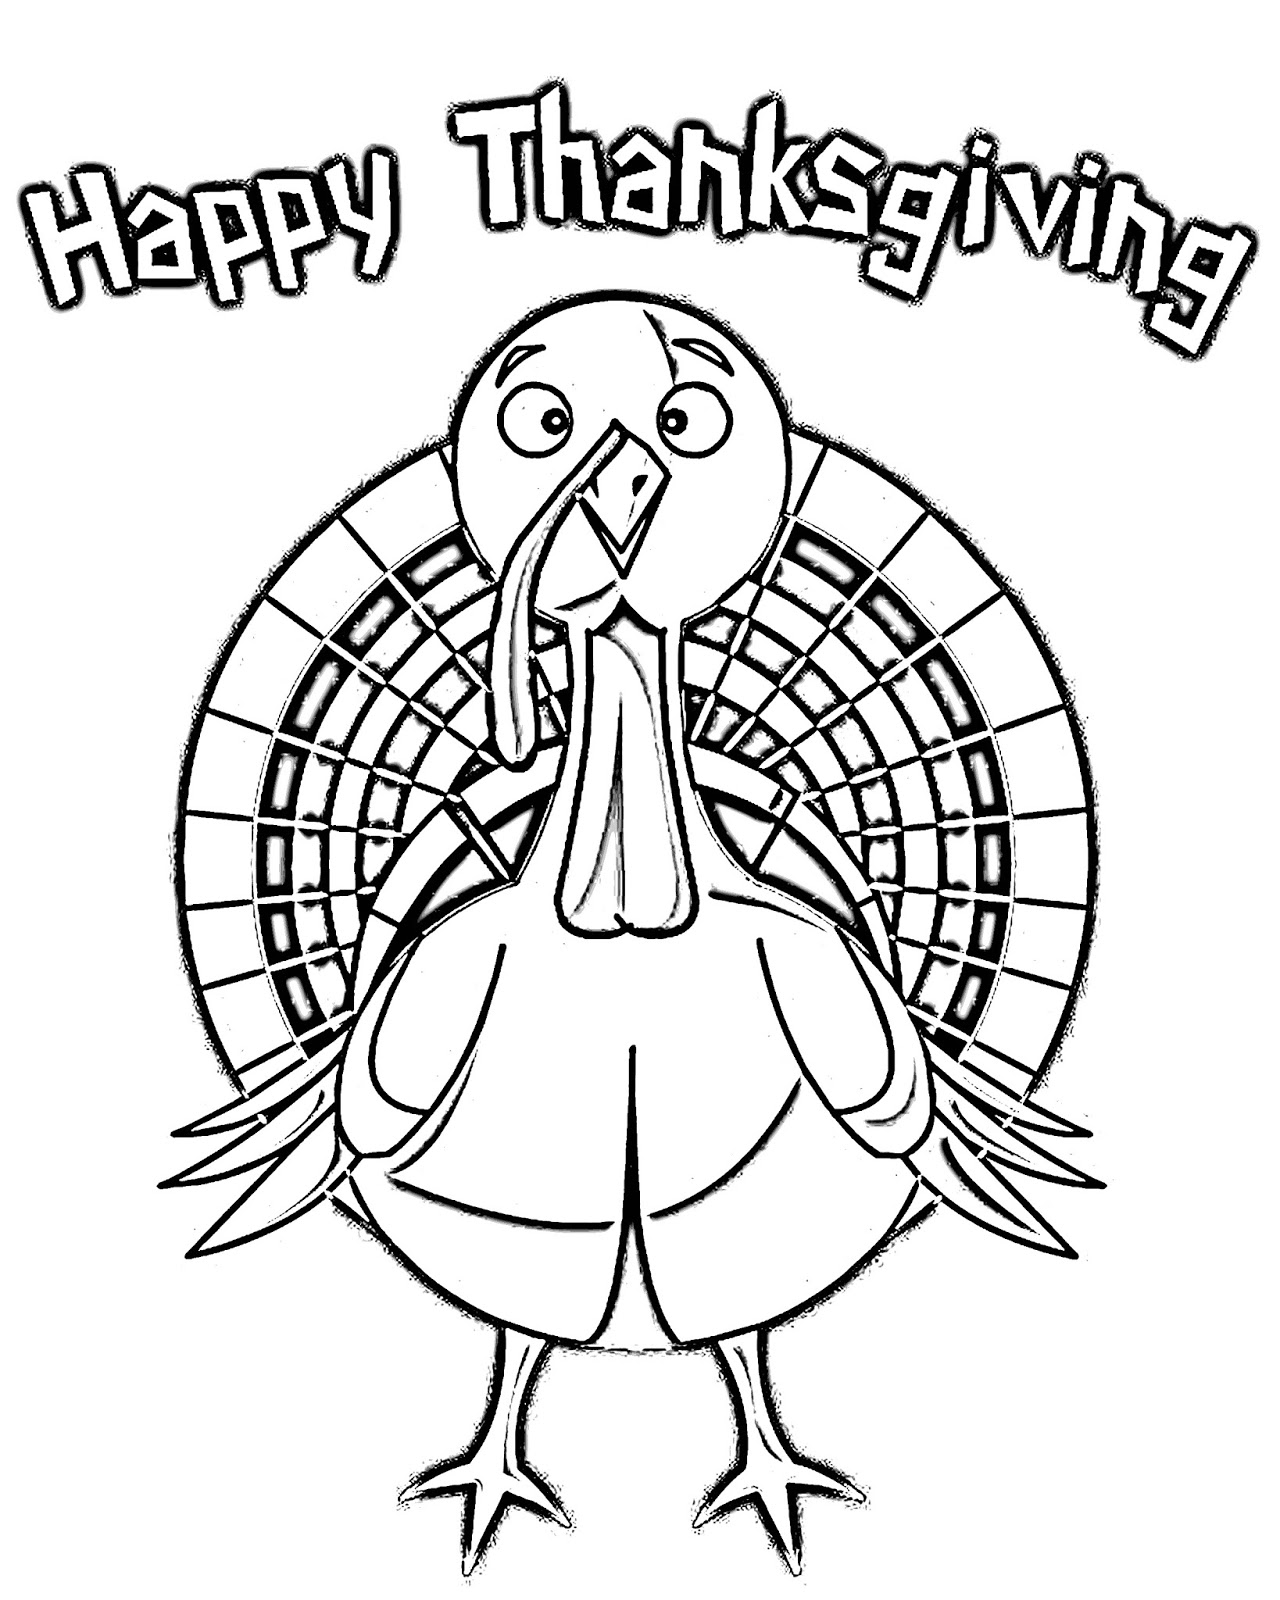 CJO Photo: Thanksgiving Coloring Page: Happy Thanksgiving Turkey